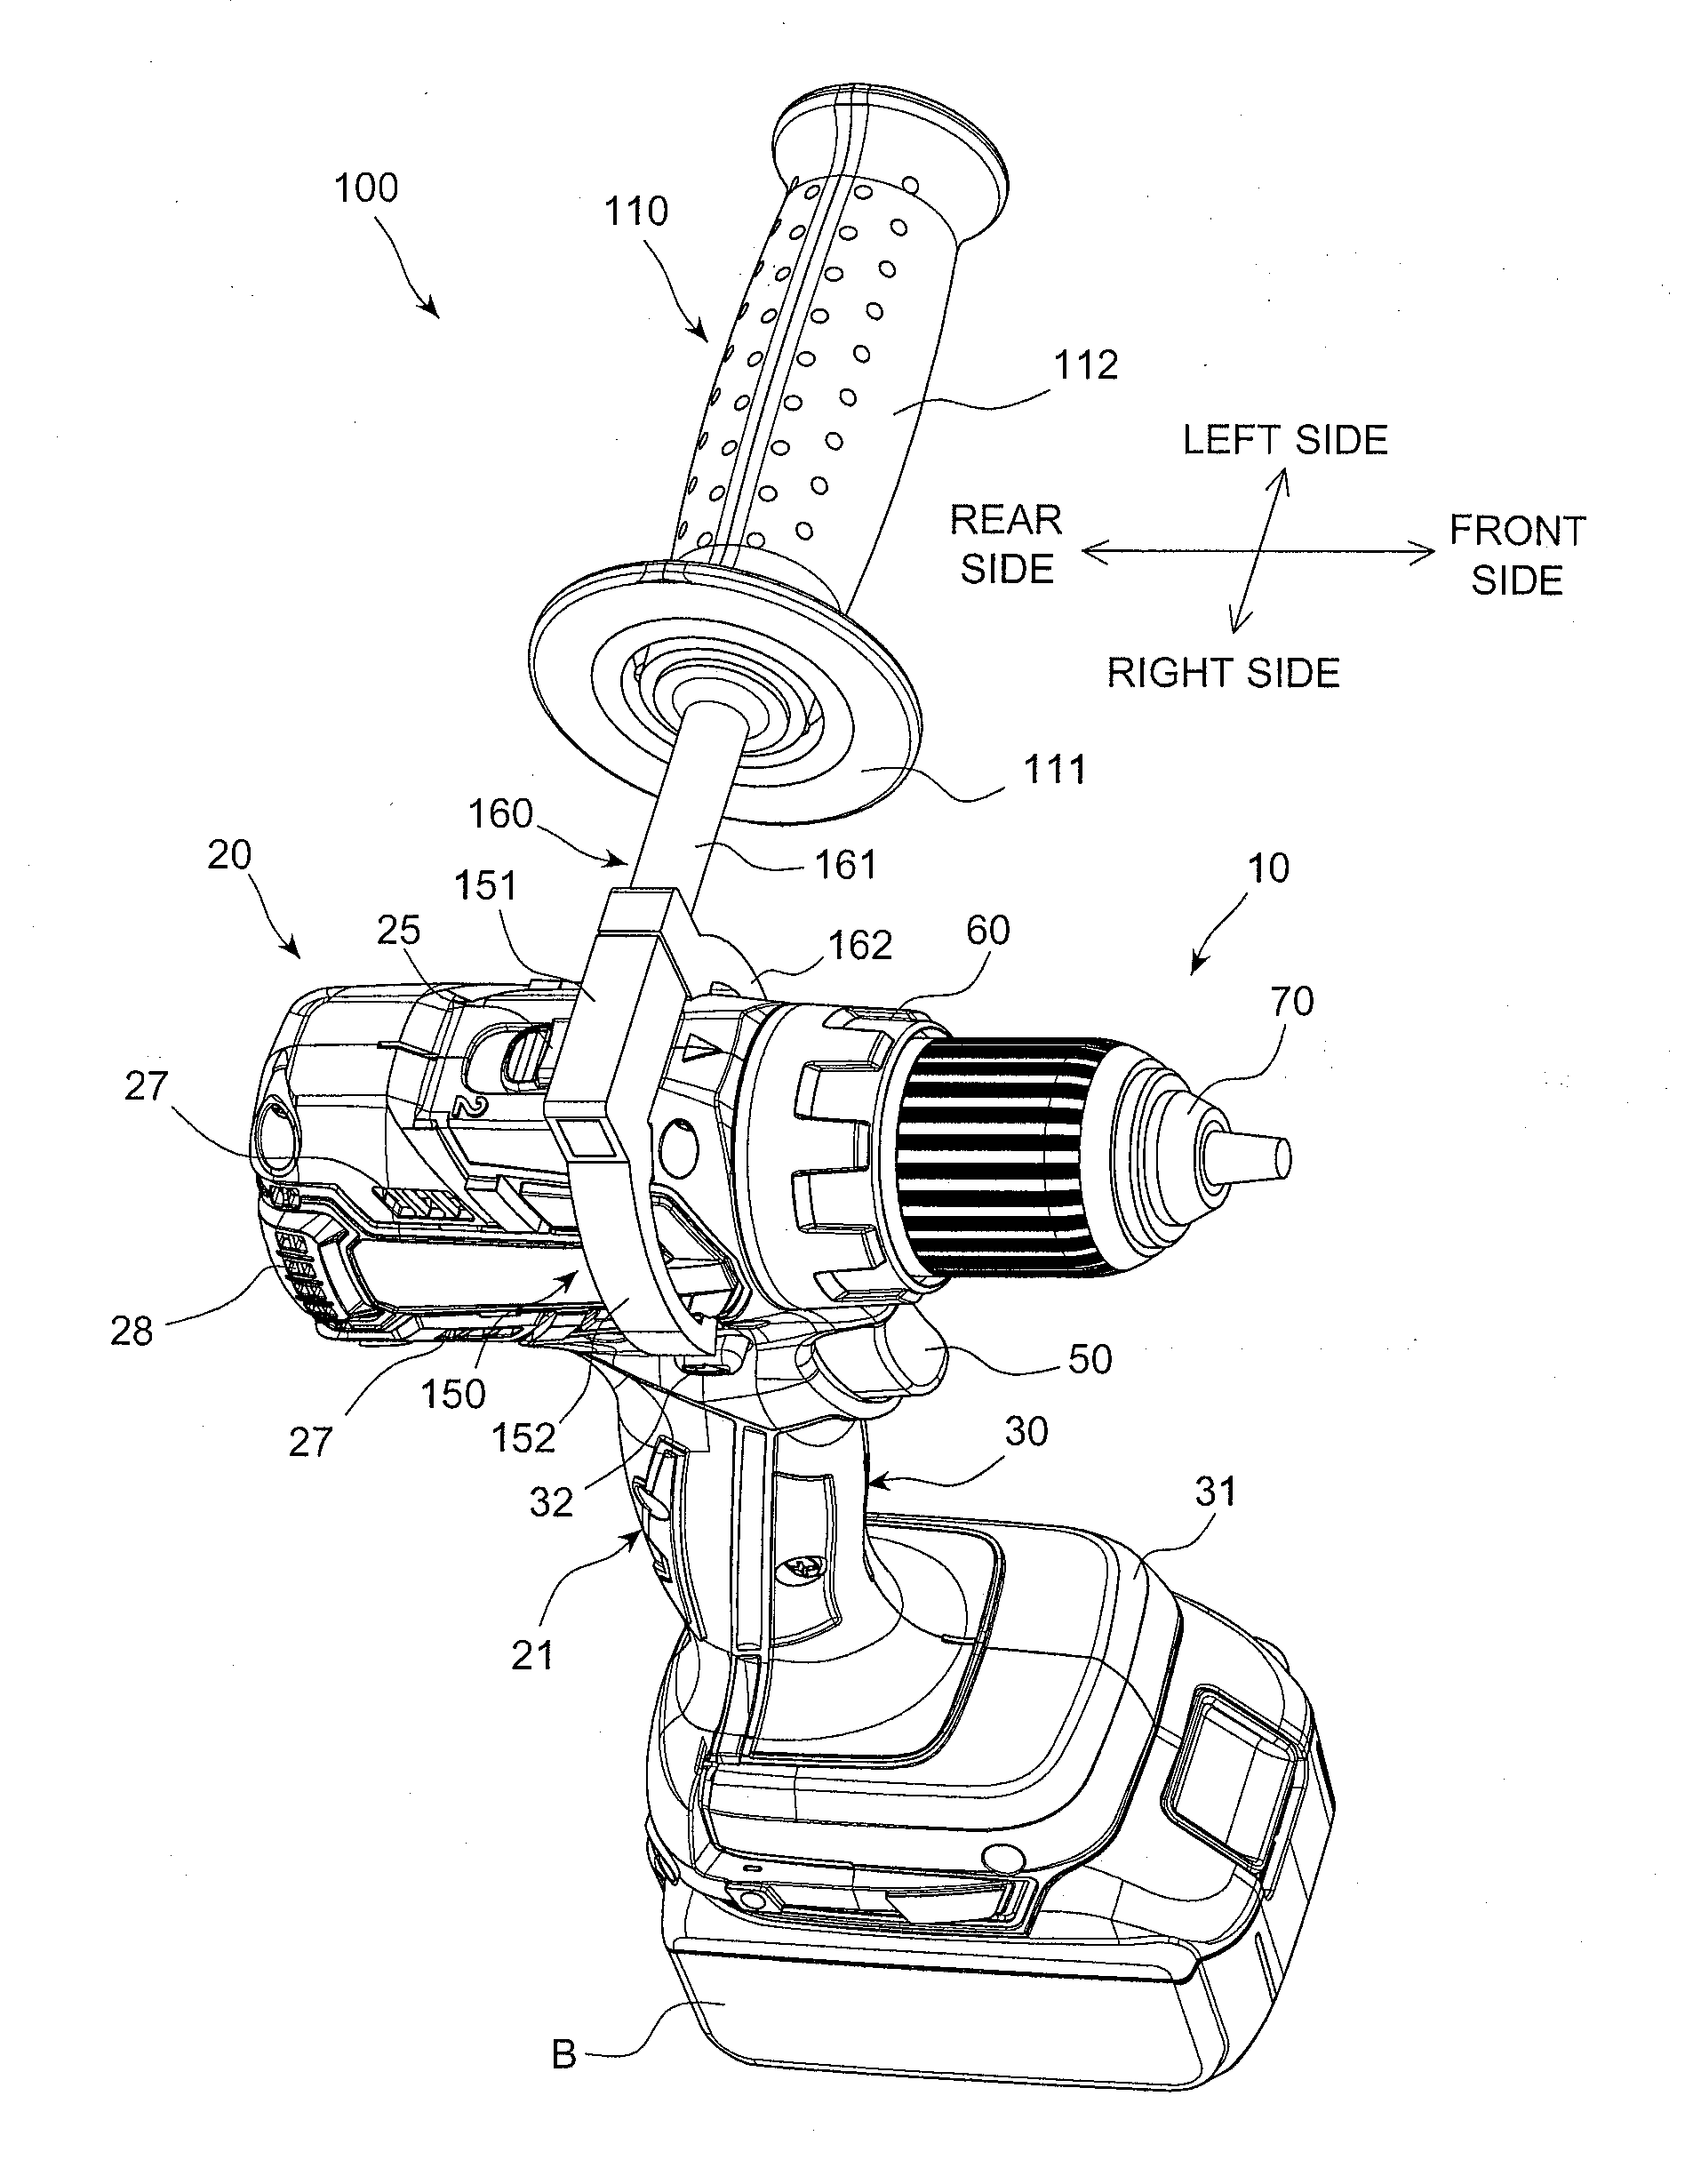 Power tool assembly, power tool, and auxiliary handle member